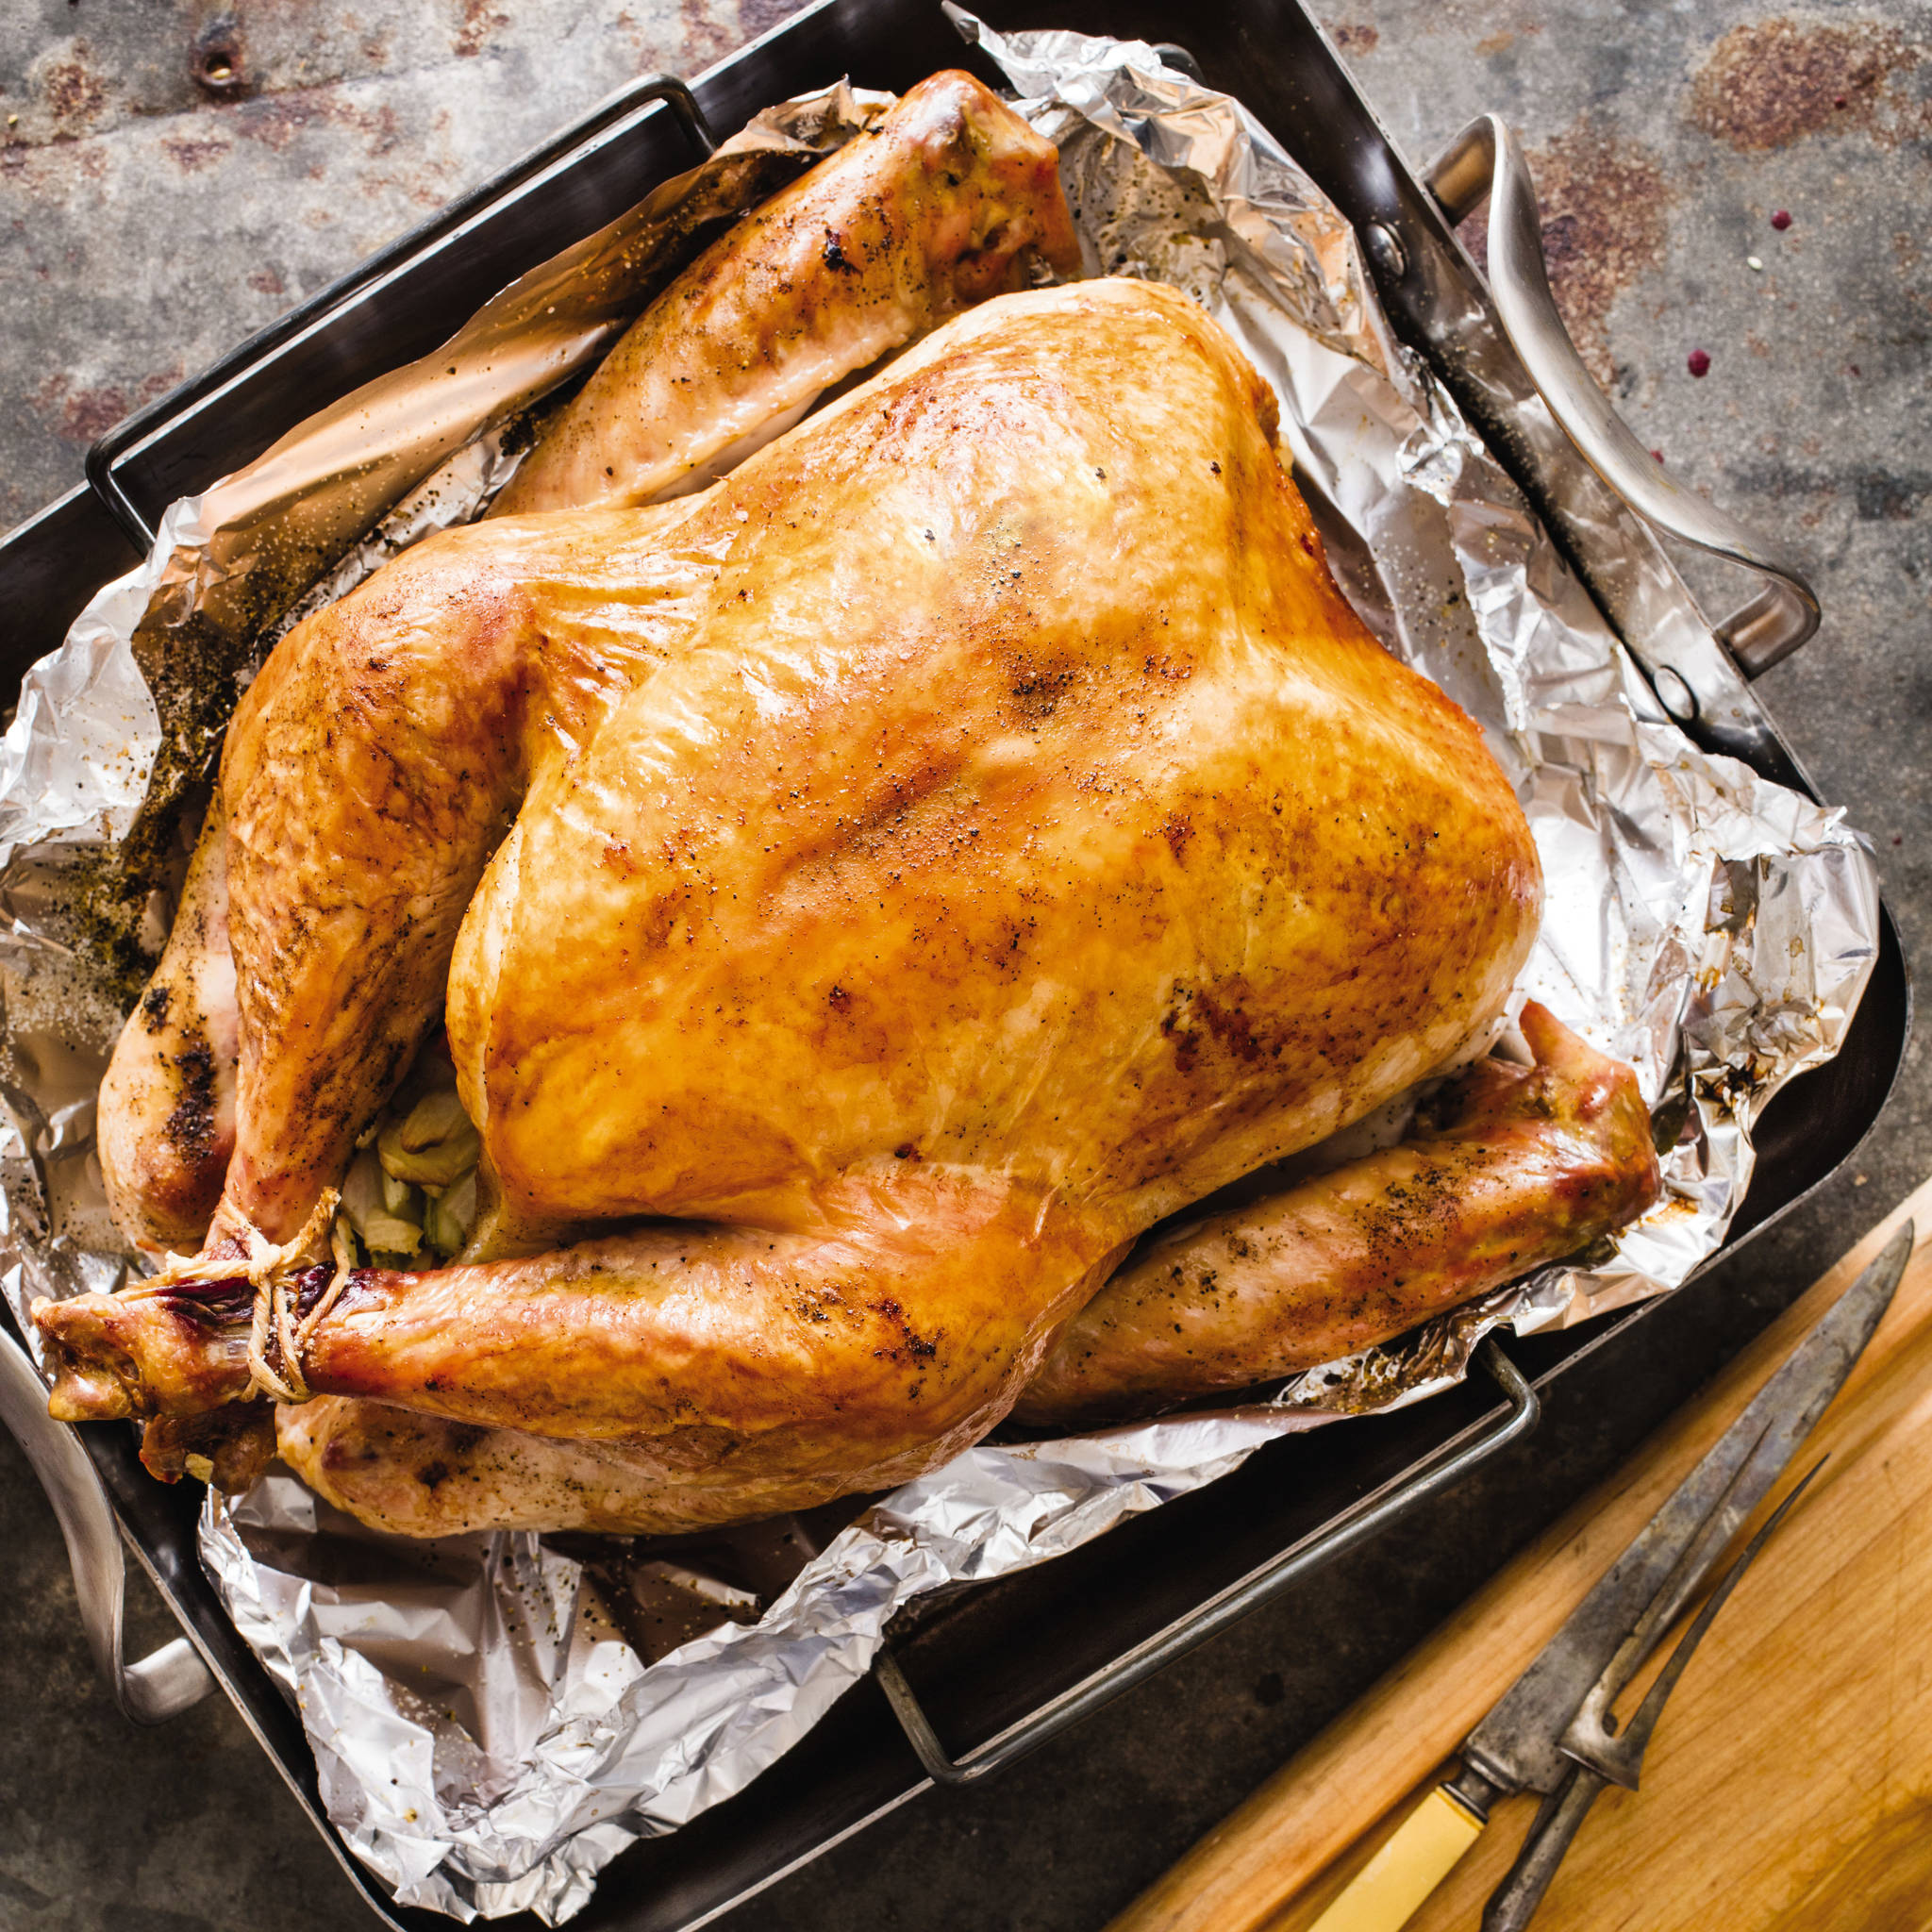 This undated photo provided by America’s Test Kitchen in October 2018 shows a roast turkey in Brookline, Mass. This recipe appears in the cookbook “ATB Holiday Entertaining.” (Daniel J. van Ackere/America’s Test Kitchen via AP)                                This undated photo provided by America’s Test Kitchen in October 2018 shows a roast turkey in Brookline, Mass. This recipe appears in the cookbook “ATB Holiday Entertaining.” (Daniel J. van Ackere/America’s Test Kitchen via AP)                                This undated photo provided by America’s Test Kitchen in October 2018 shows a roast turkey in Brookline, Mass. This recipe appears in the cookbook “ATB Holiday Entertaining.” (Daniel J. van Ackere/America’s Test Kitchen via AP)